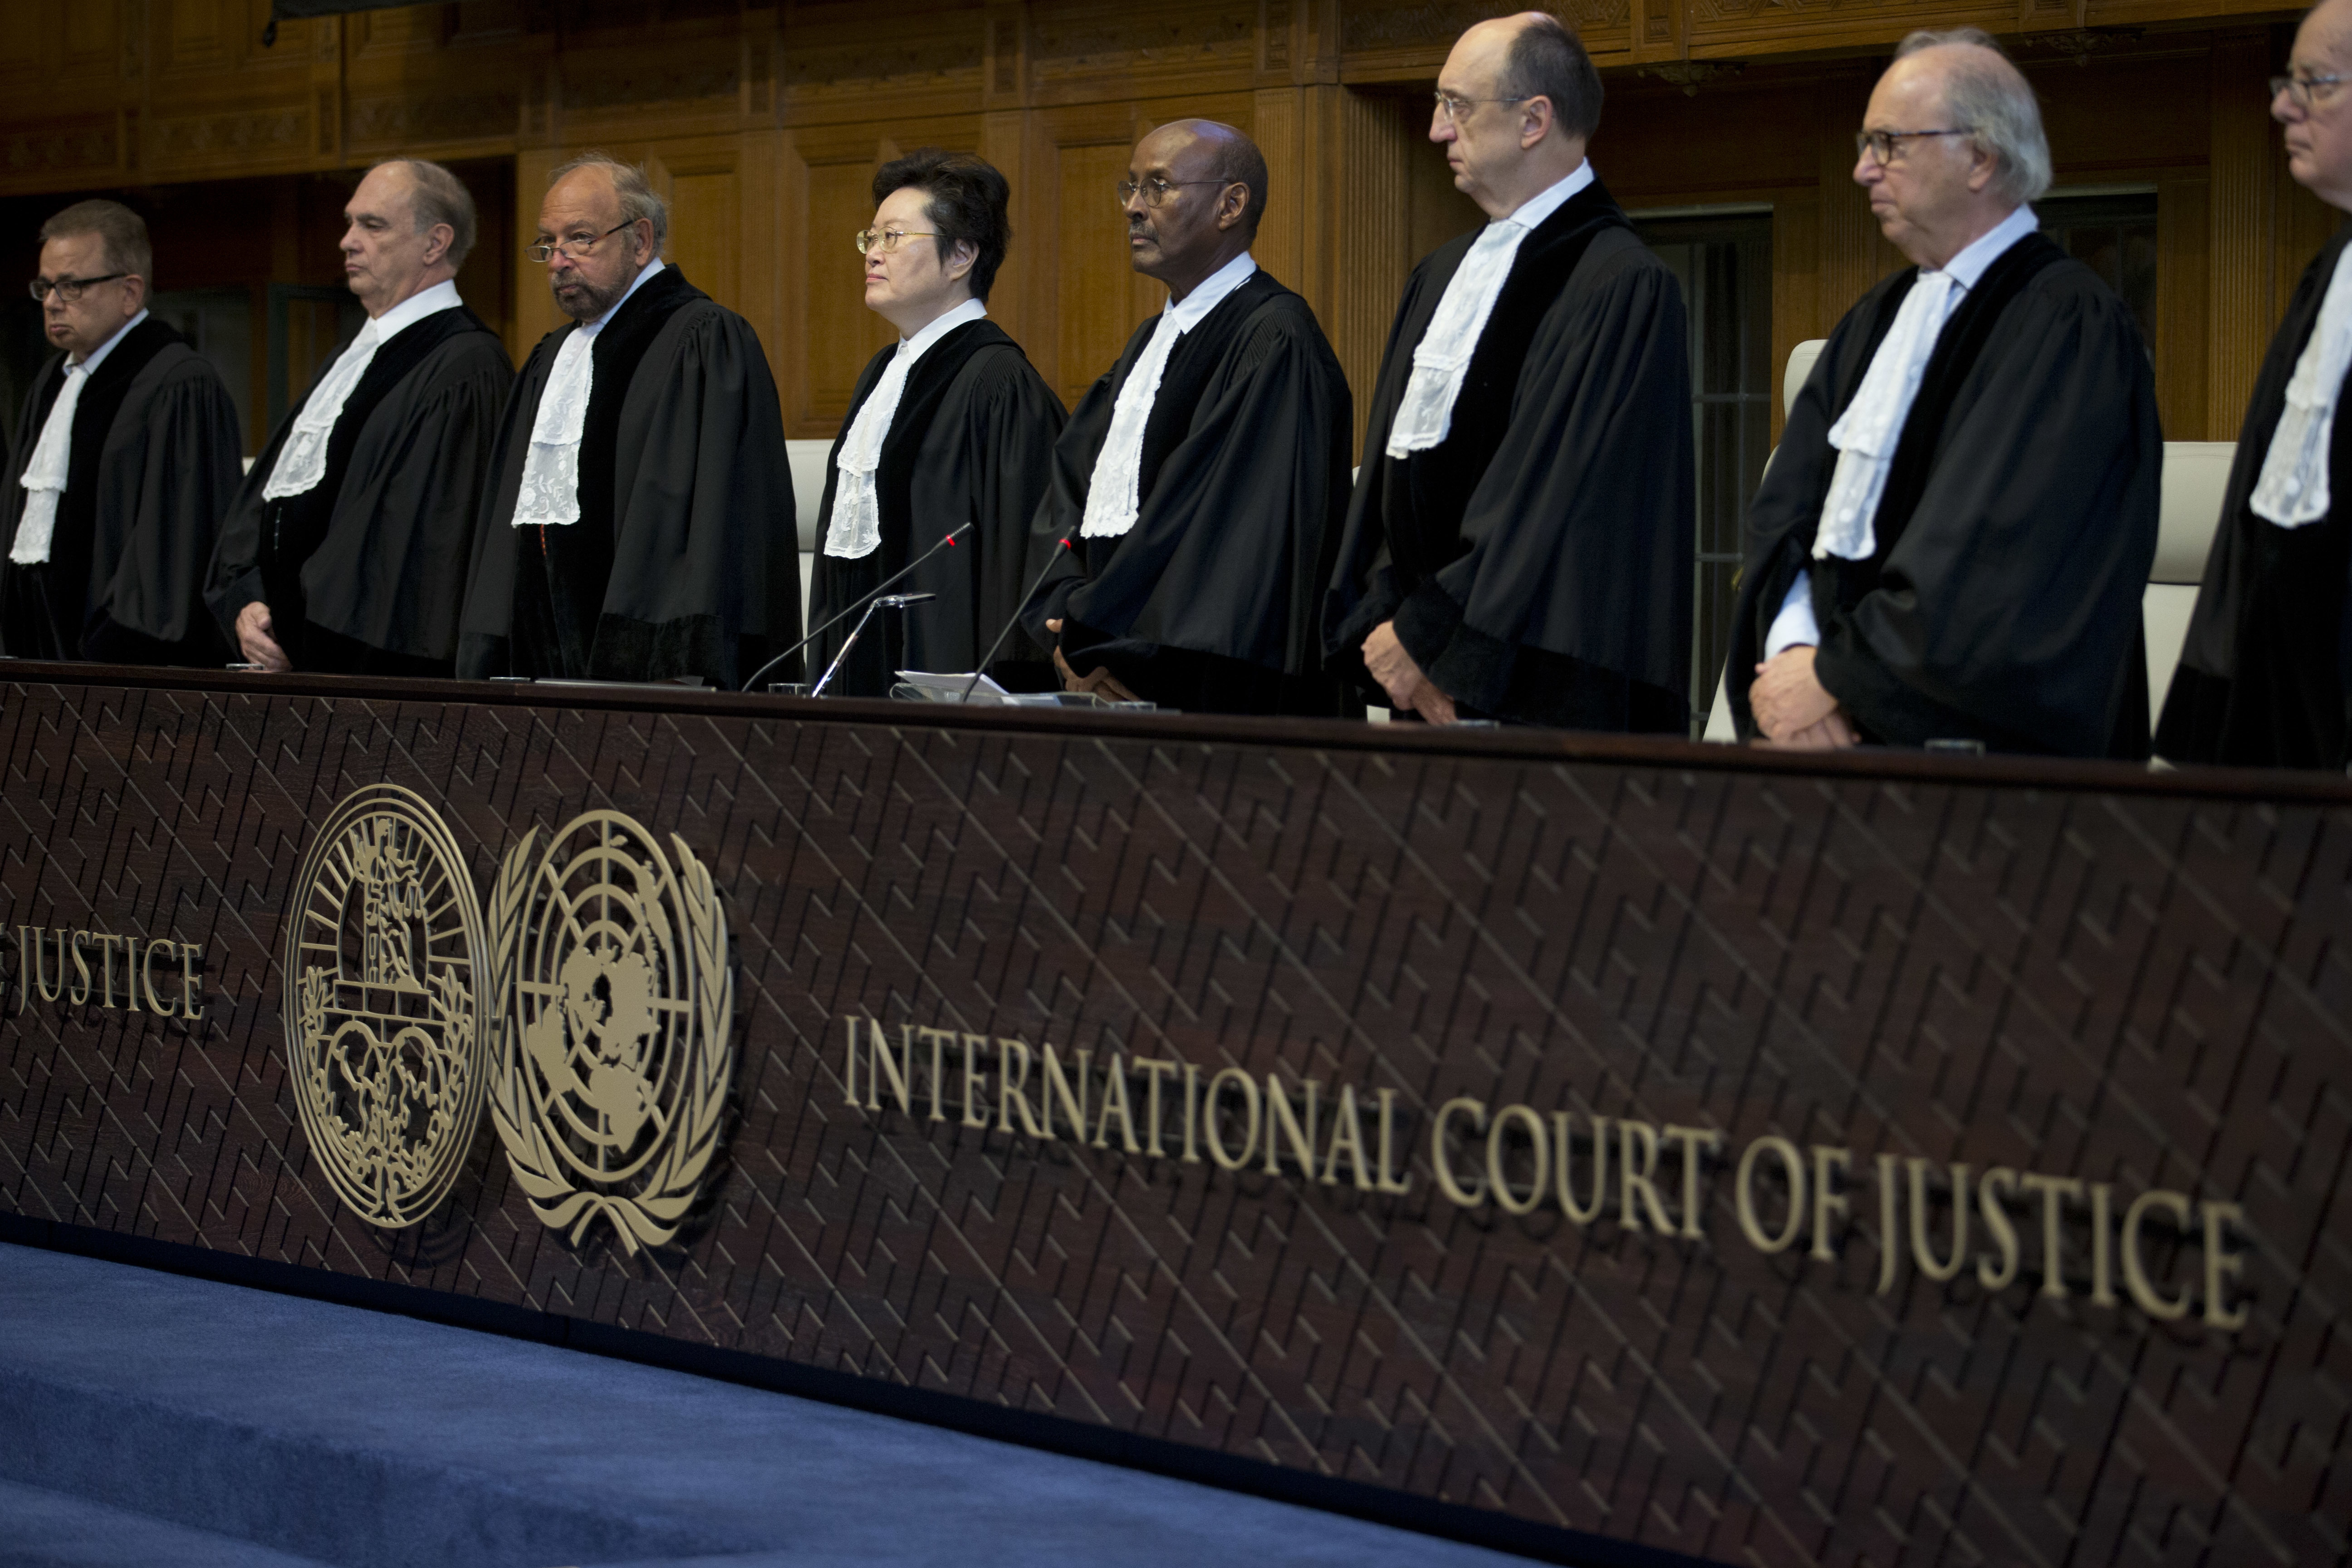 Judges enter the International Court of Justice in The Hague, Netherlands